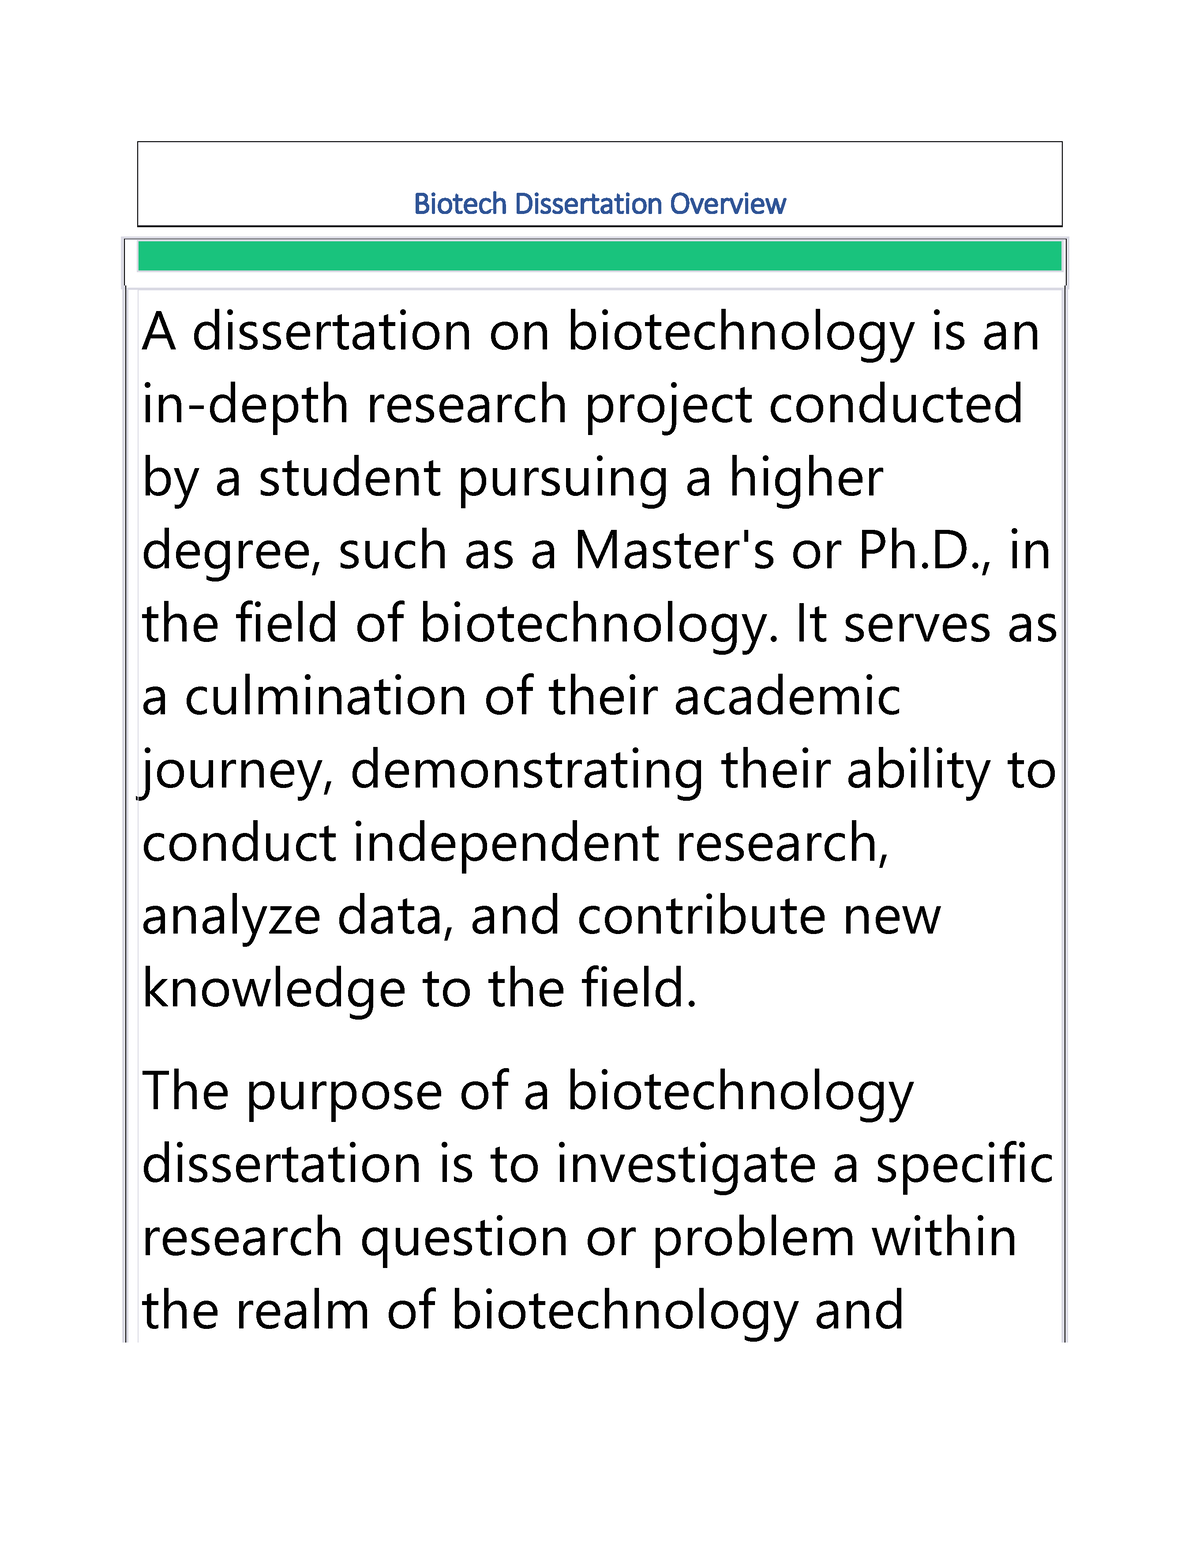 dissertation project in biotechnology in pune